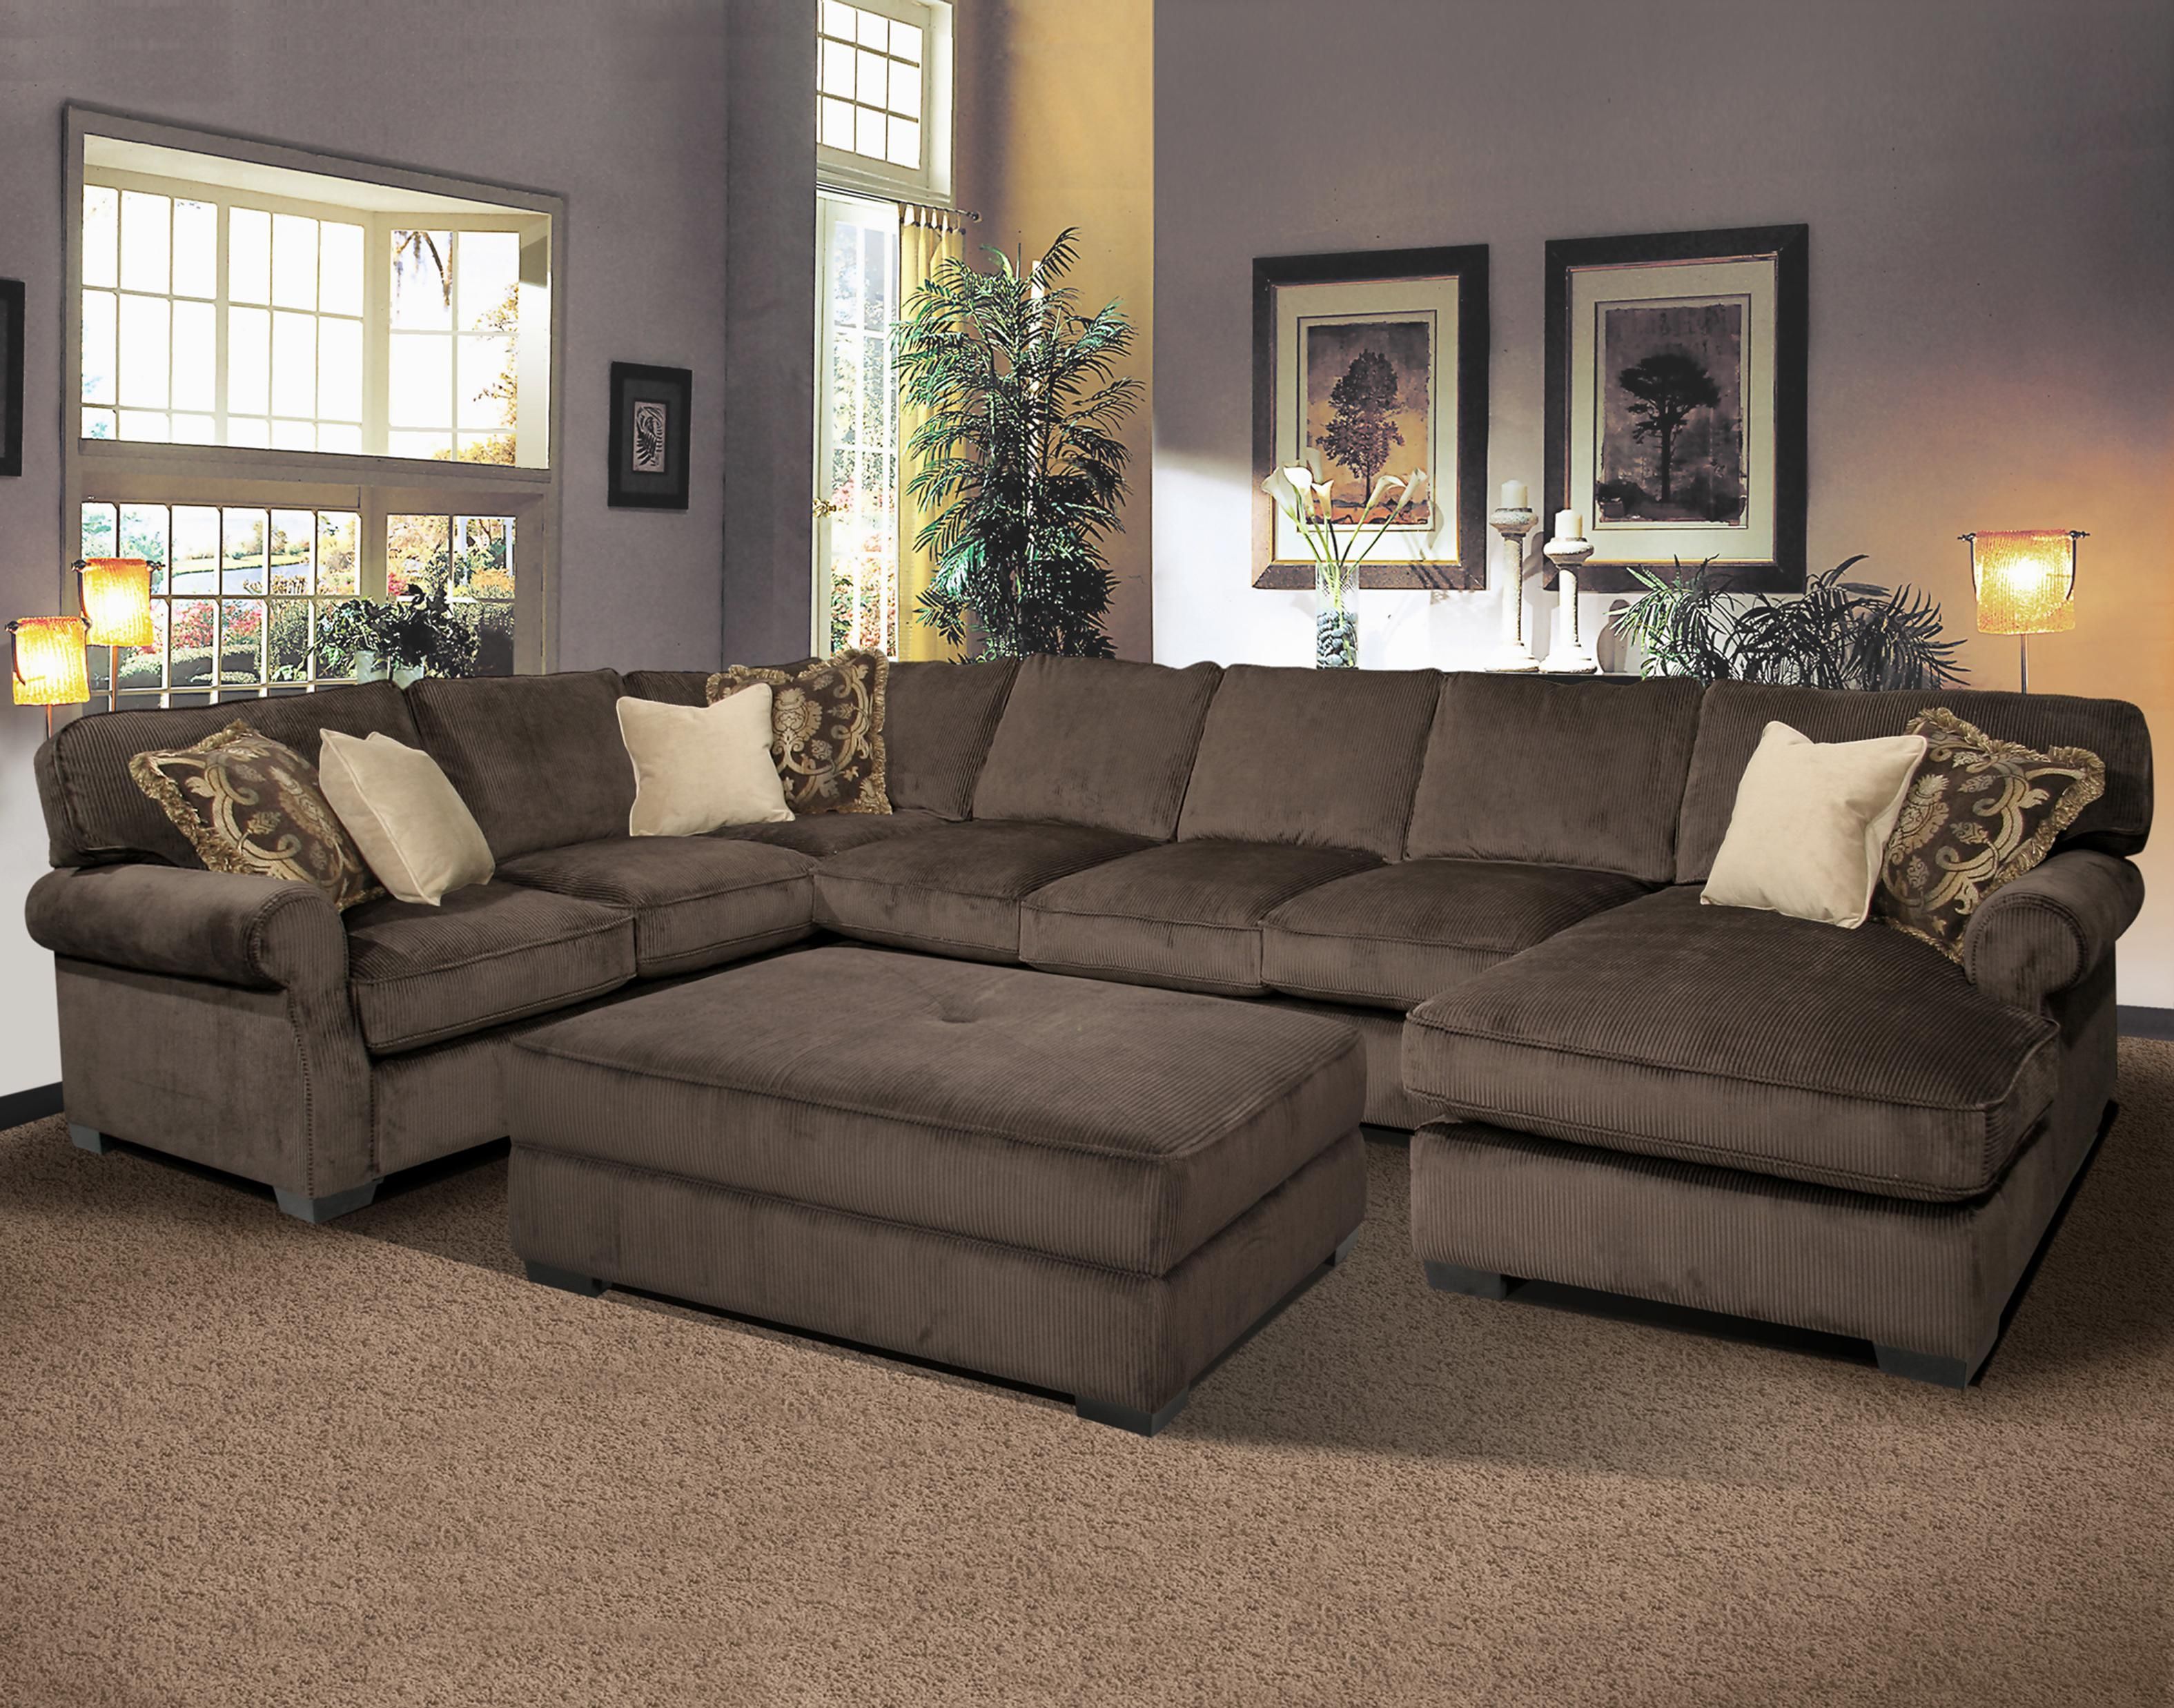 25 Best Ideas About Large Sectional Sofa On Pinterest Within Expensive Sectional Sofas (View 11 of 12)